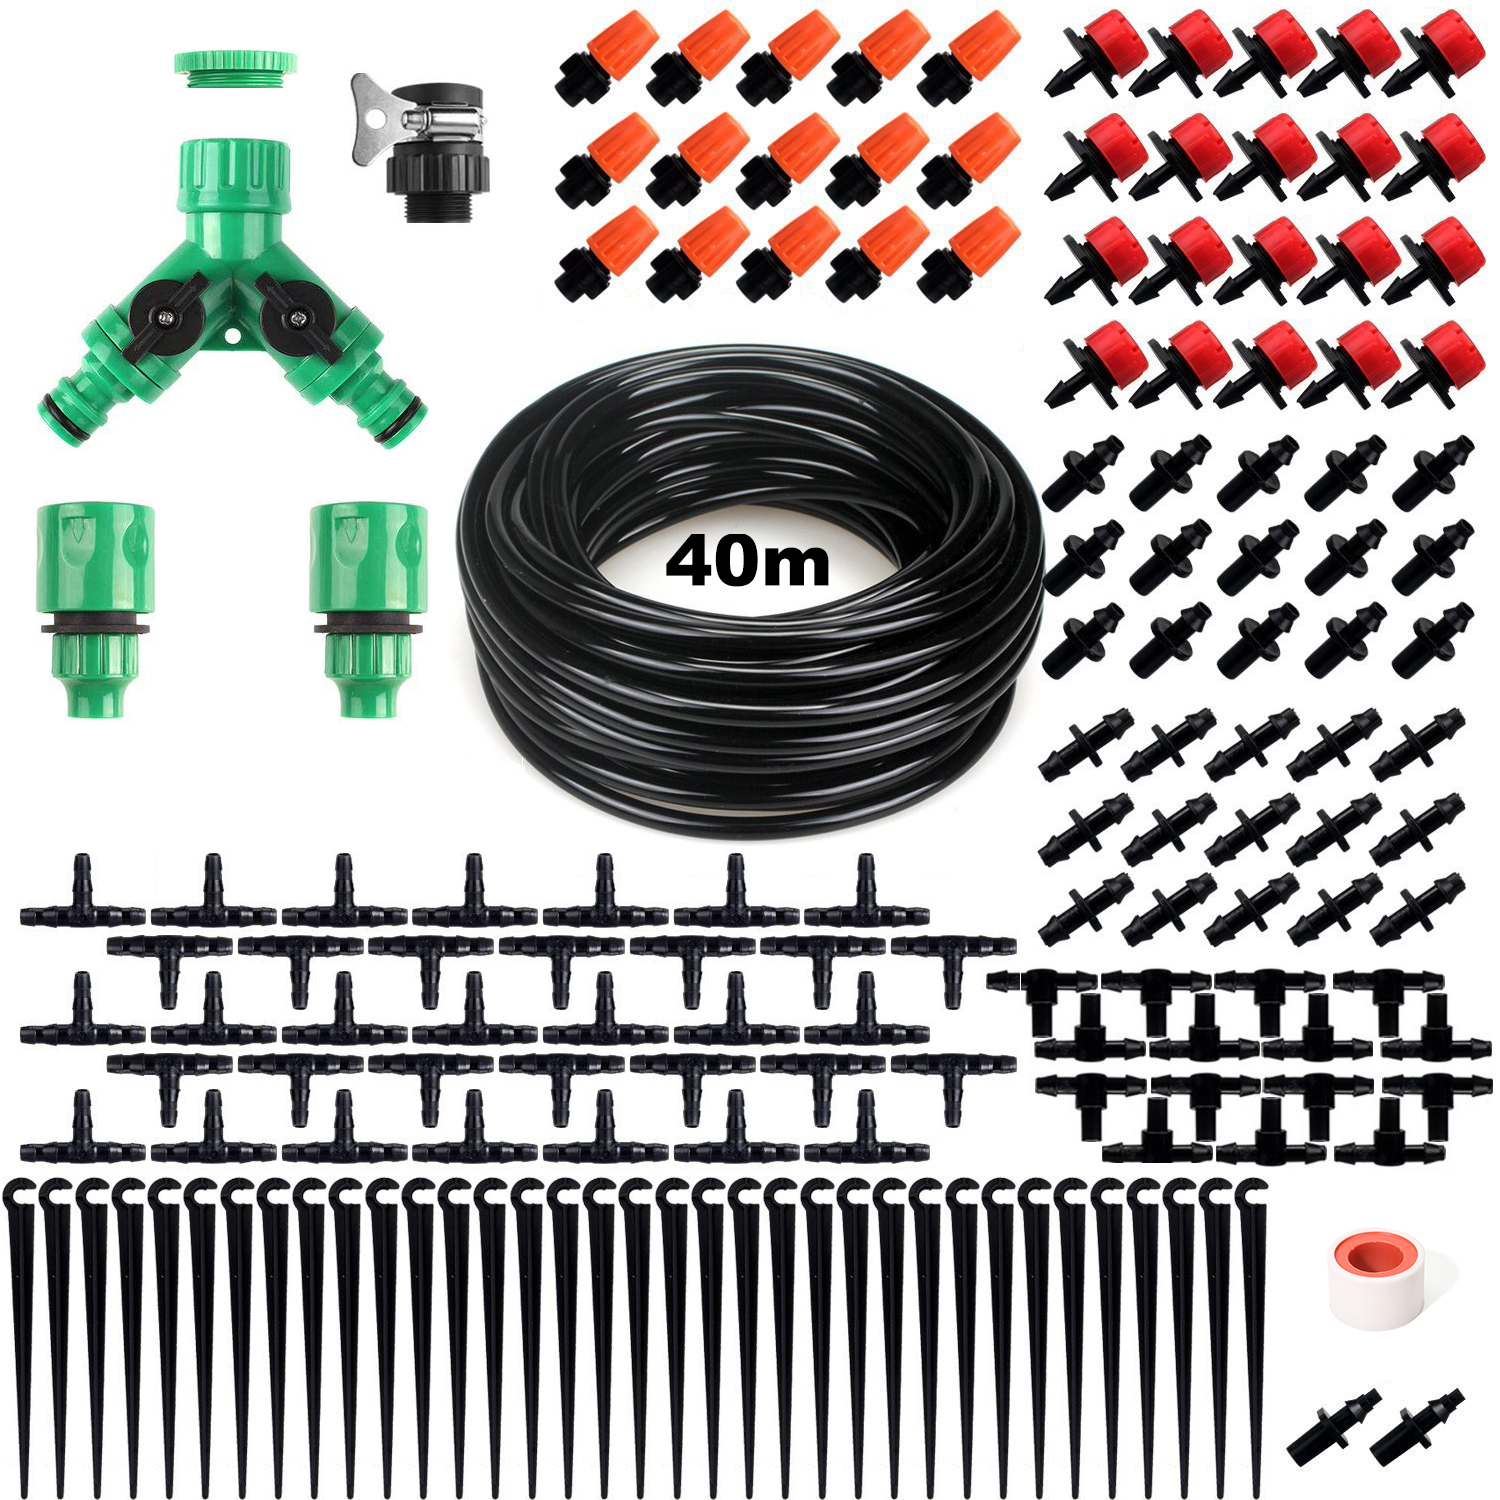 OUTERDO-40M-Mist-Cooling-Irrigation-System-Micro-Drip-Irrigation-Kit-Garden-Patio-Plant-Watering-Kit-1537233-1